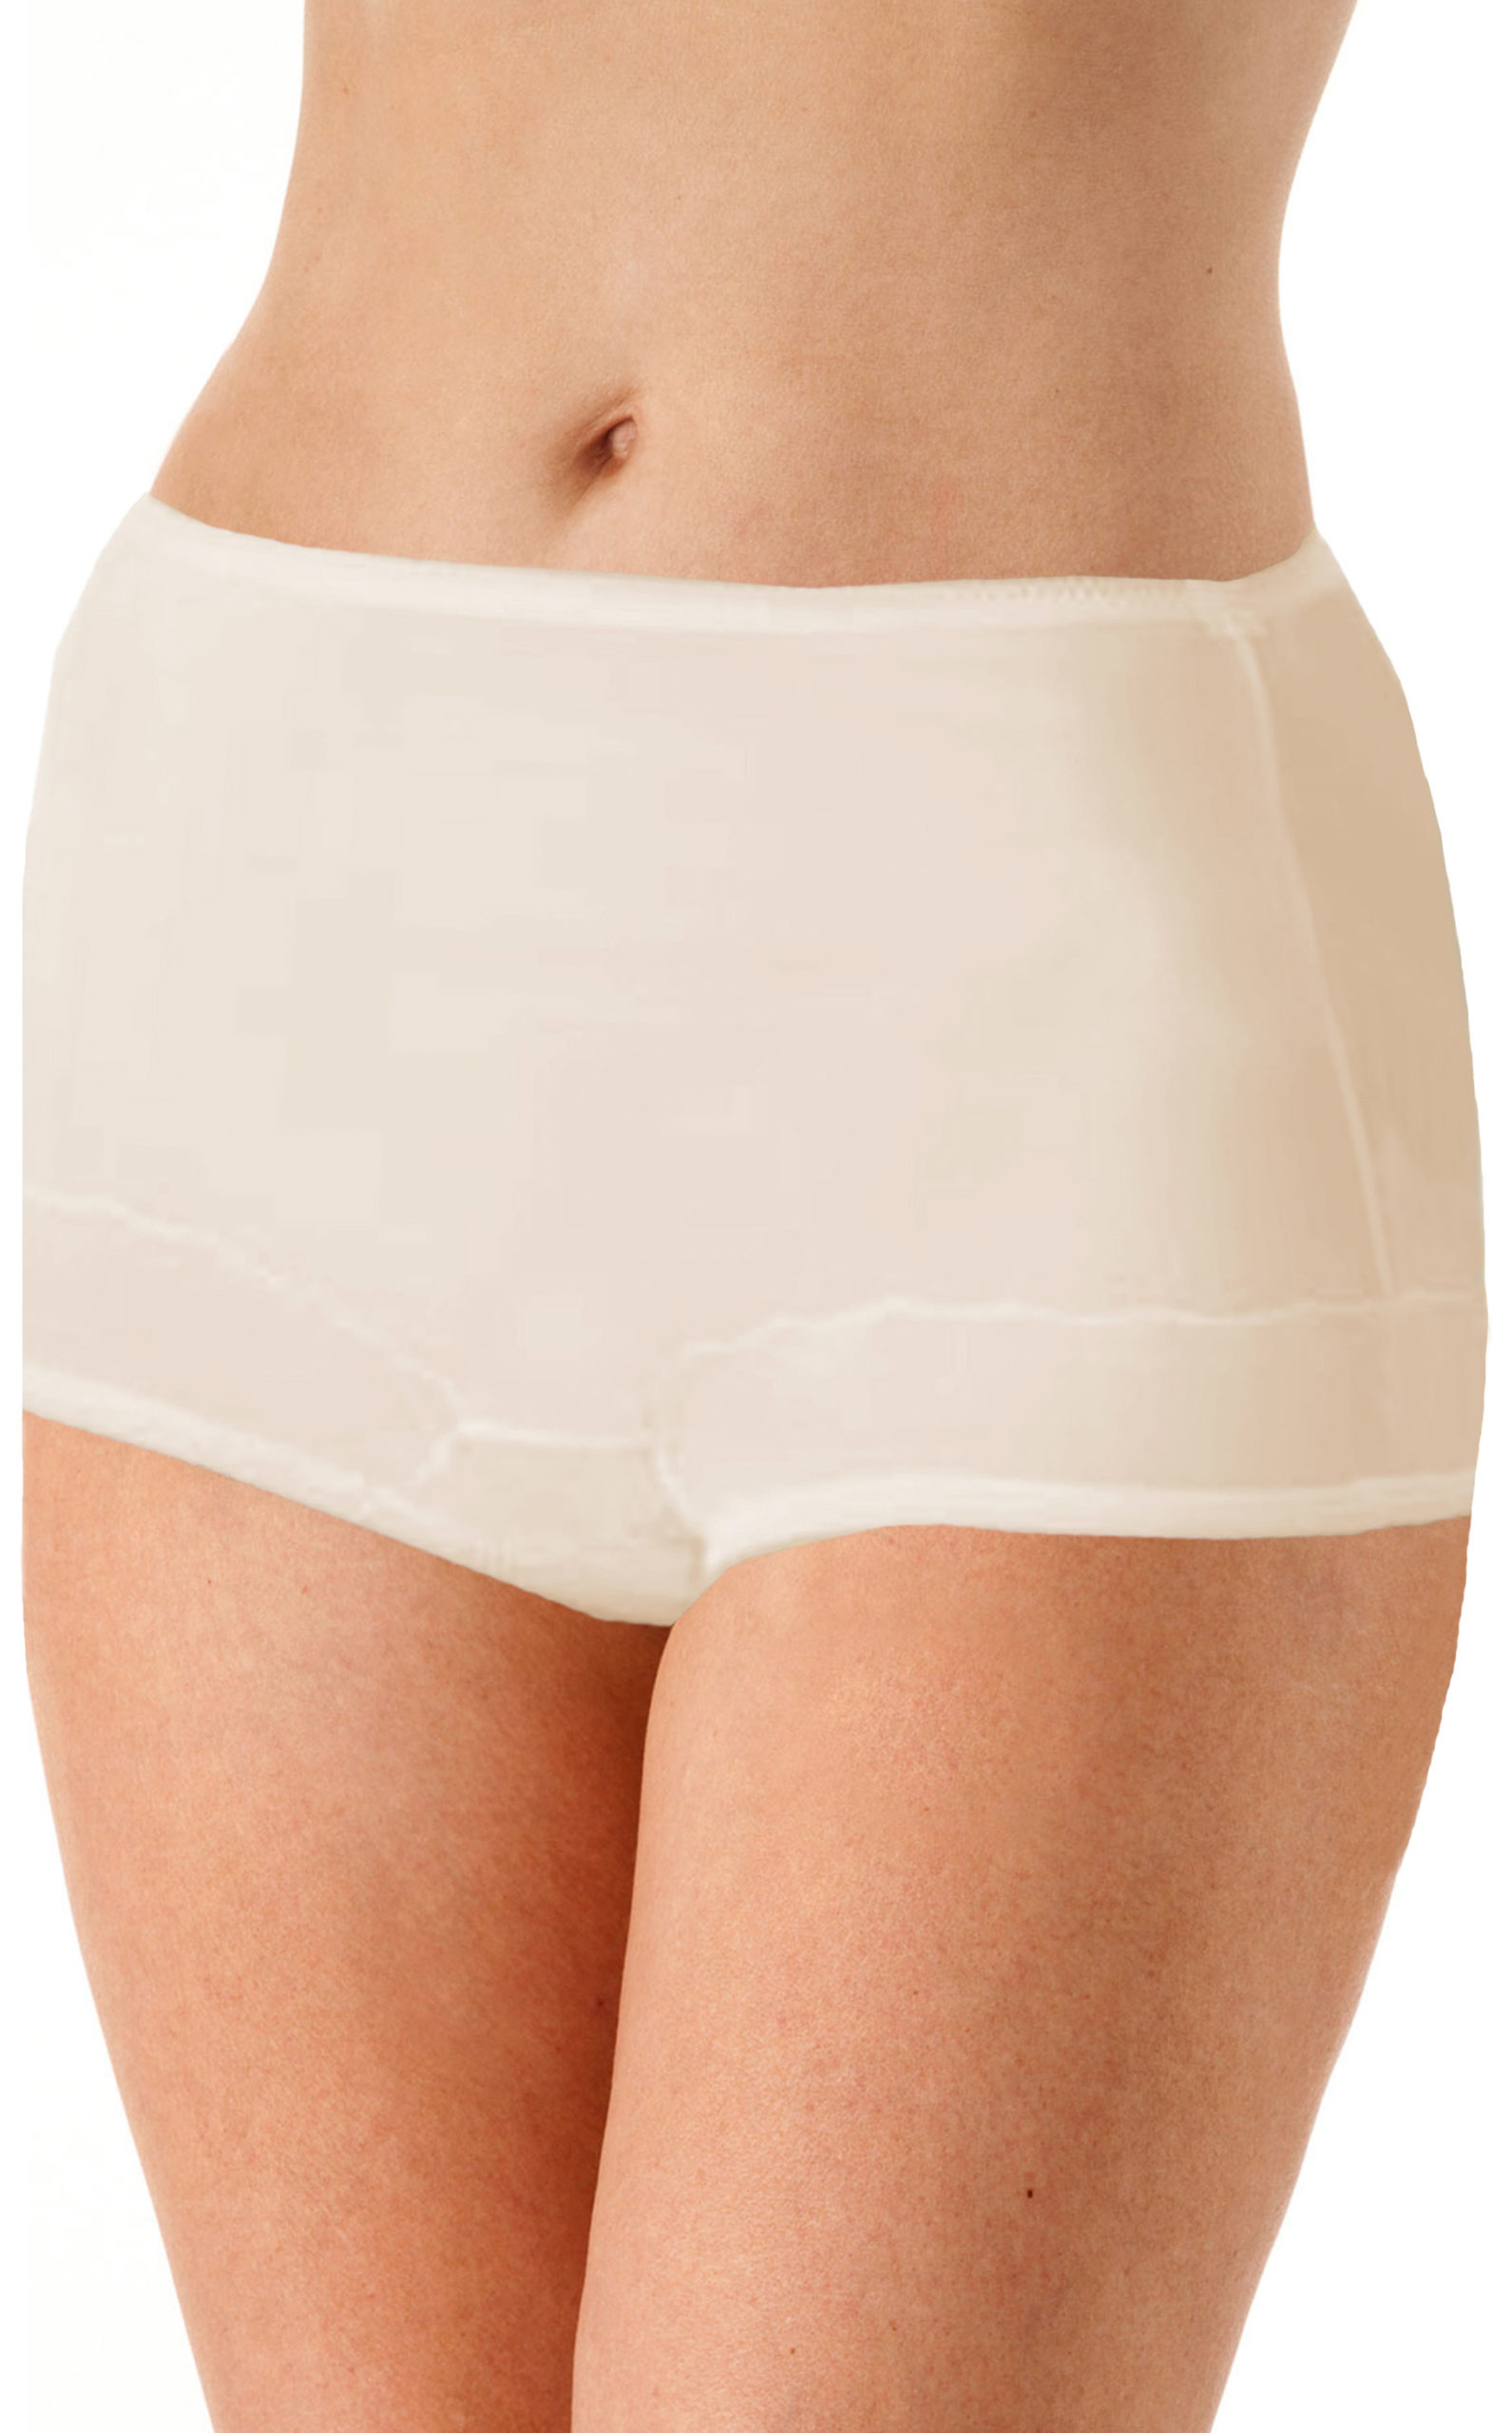 Why is it Important For Women to Switch to 100% Cotton Innerwear? – ATTWACT